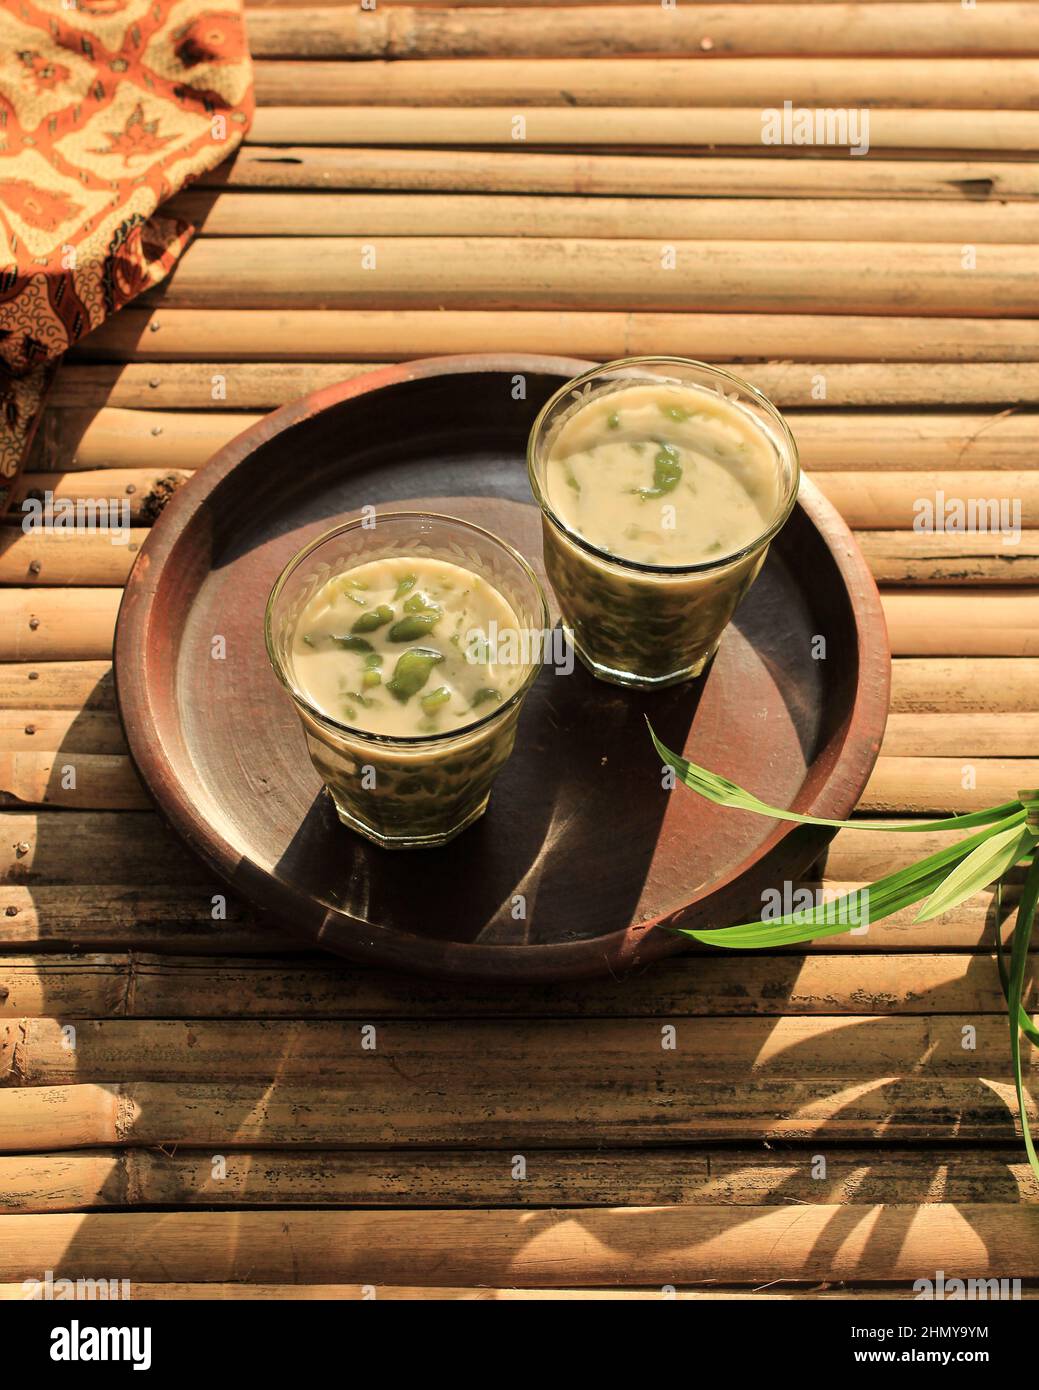 Cendol or Dawet is Indonesian Traditional Dessert Made from Rice Flour, Palm Sugar, Coconut Milk, and Pandanus Leaves. Es Cendol Very Popular During t Stock Photo